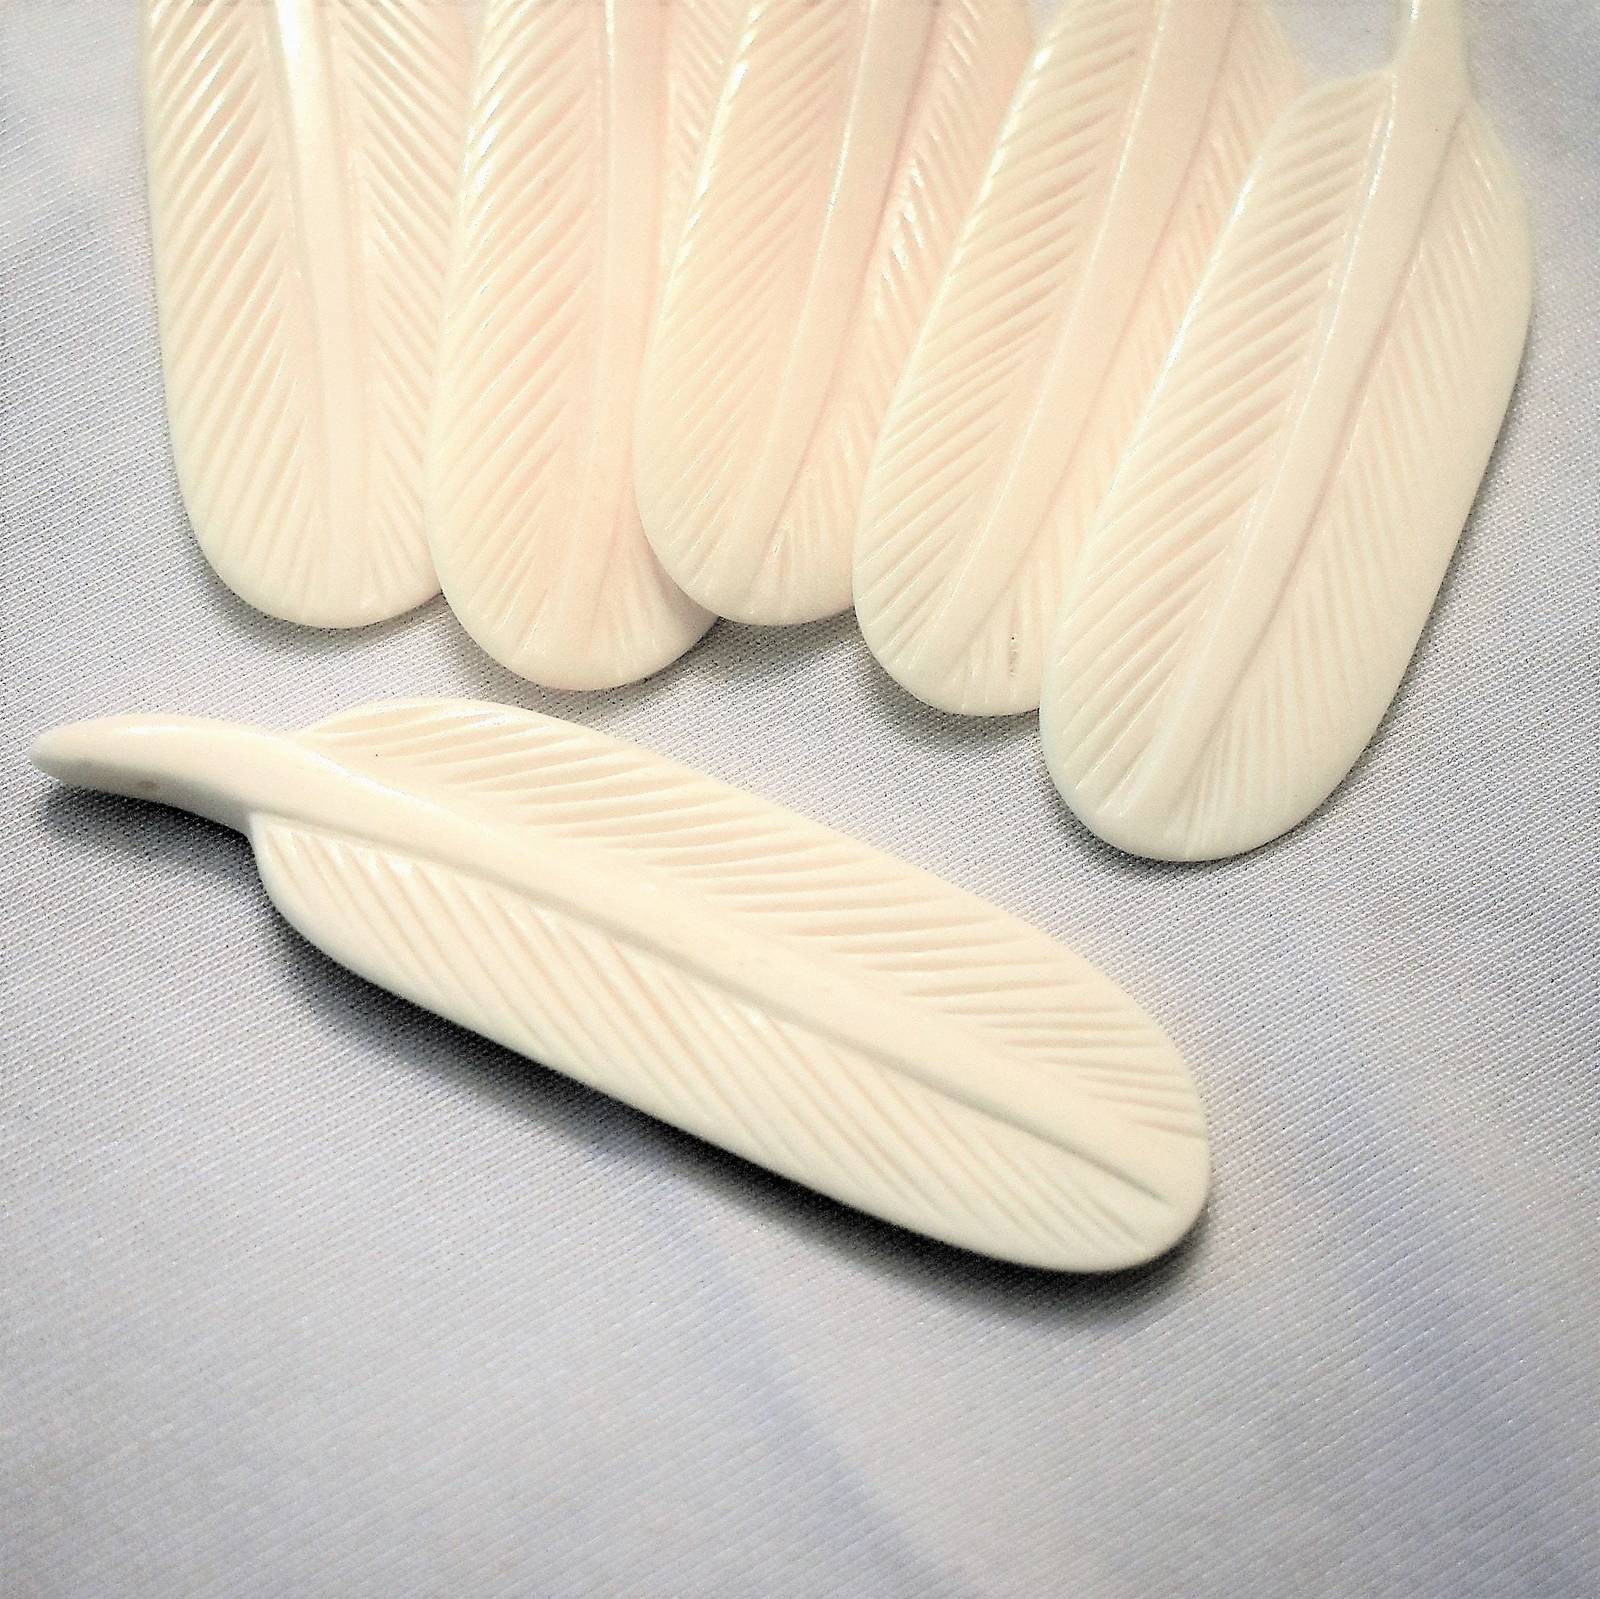 4 Inch Bone Feather Focal Bead, Hand Carved, 10cm Cream White